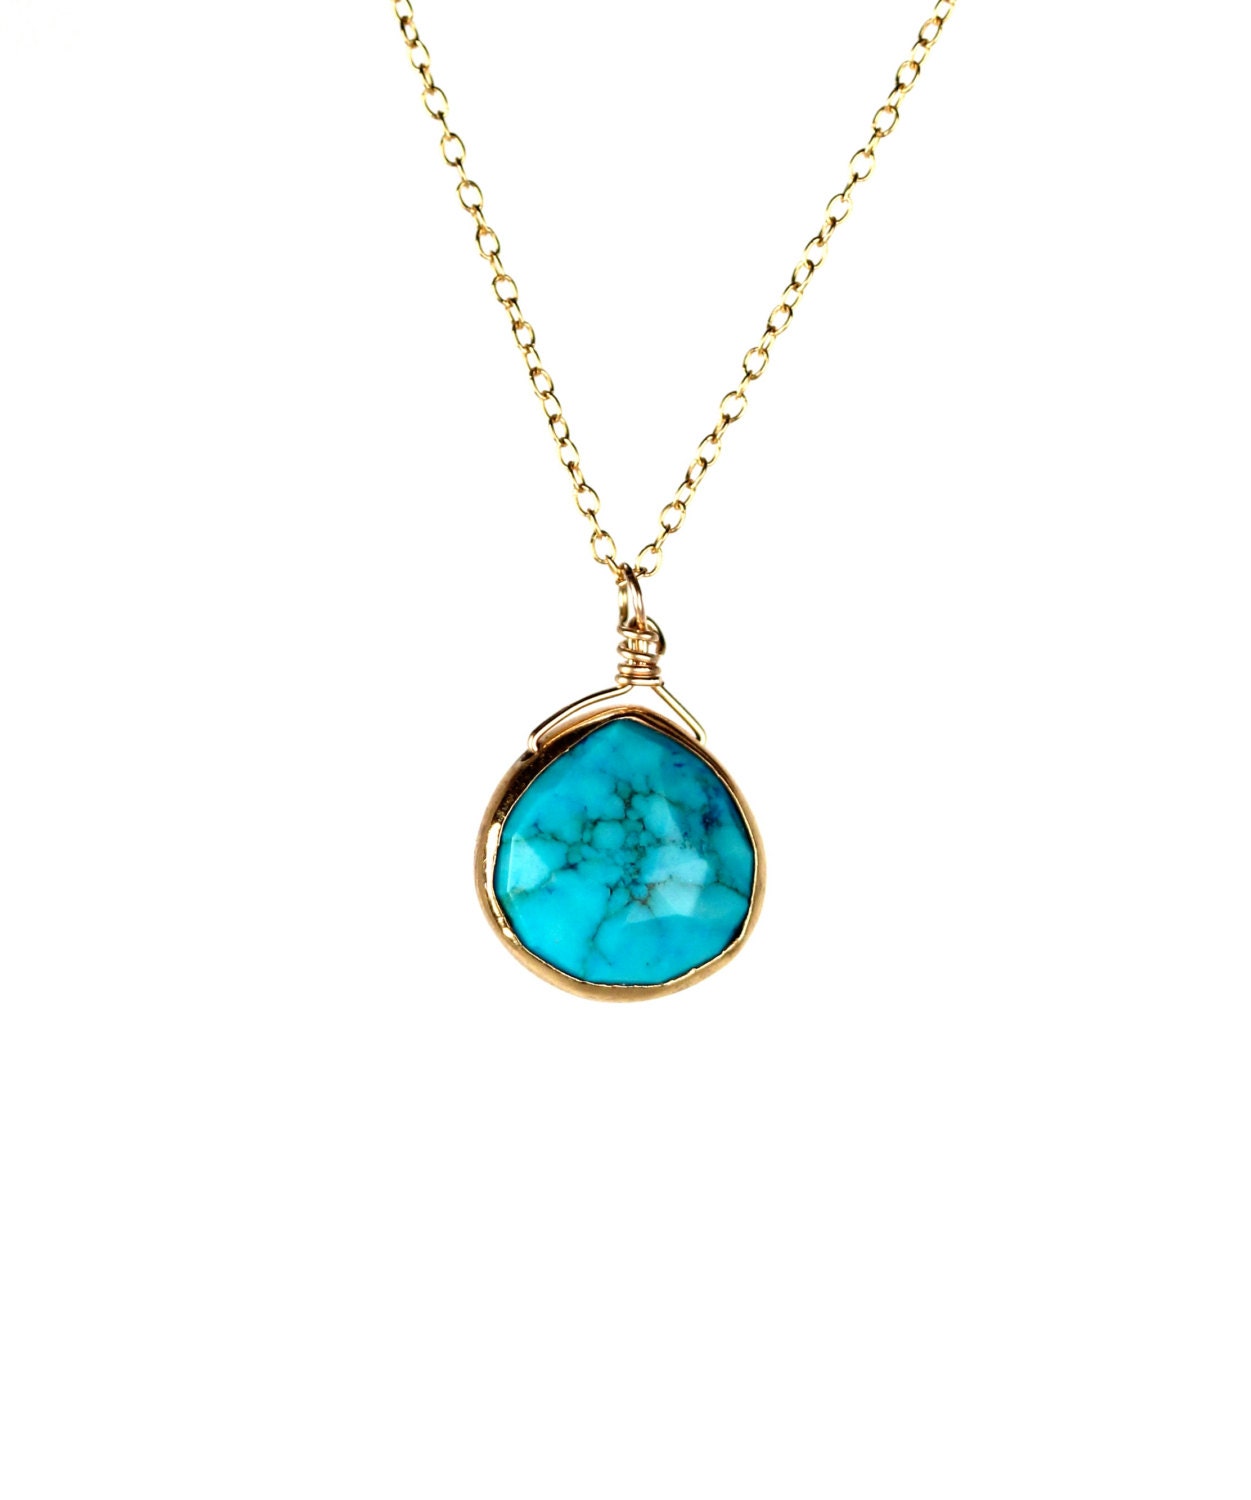 Turquoise necklace turquoise teardrop necklace by BubuRuby